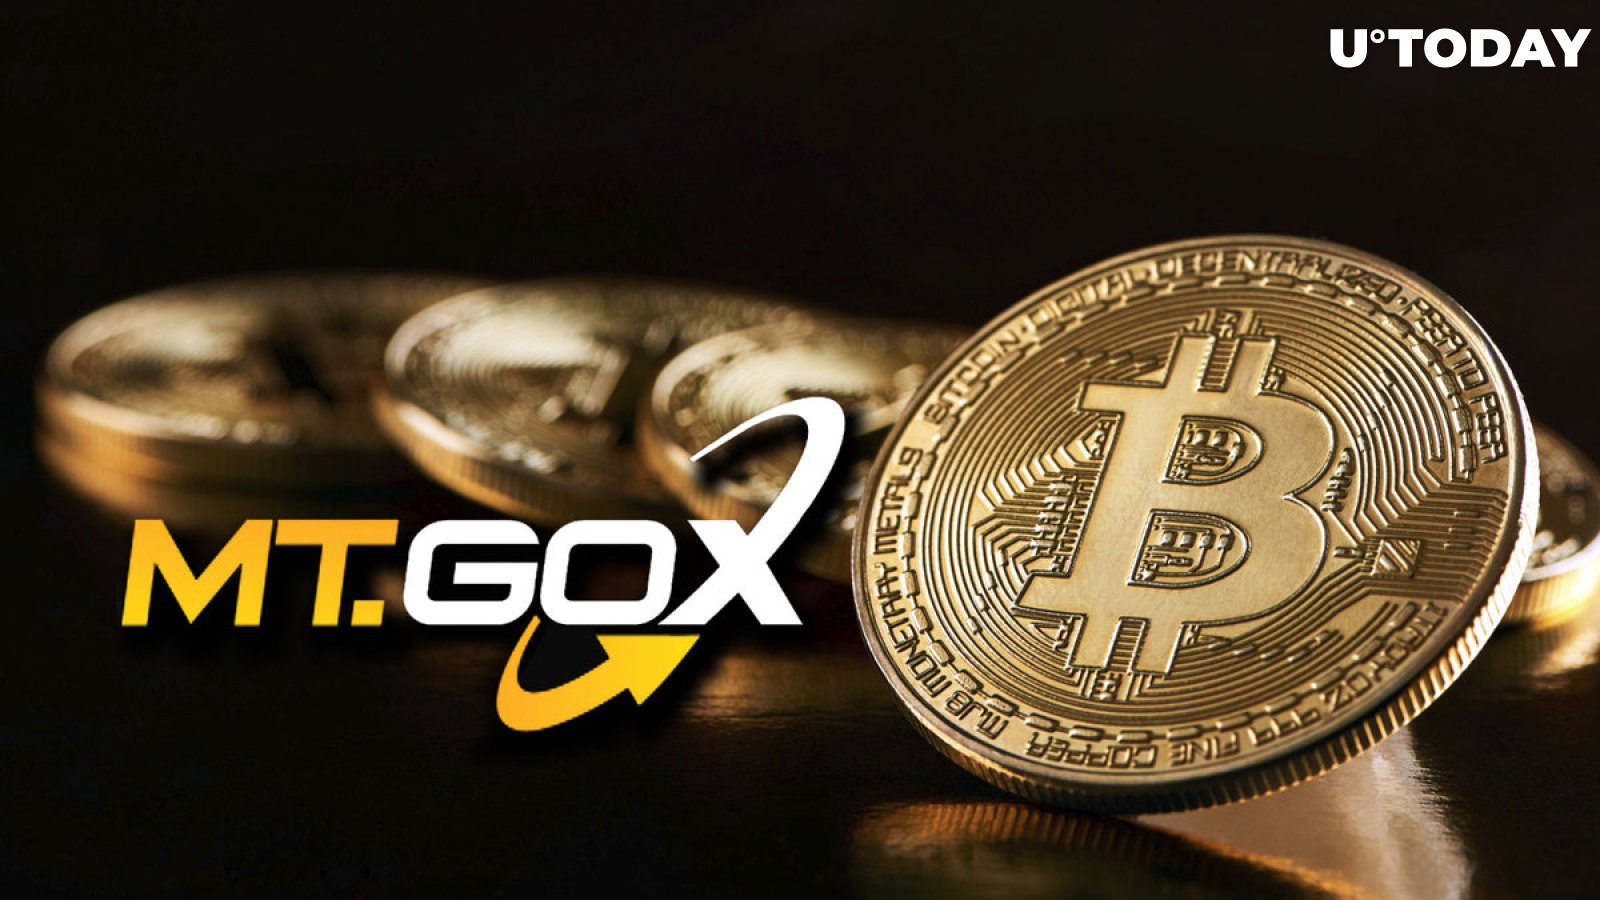 Mt. Gox’s $9 Billion Bitcoin Payout to Creditors Might Be Nearing Reality: Report